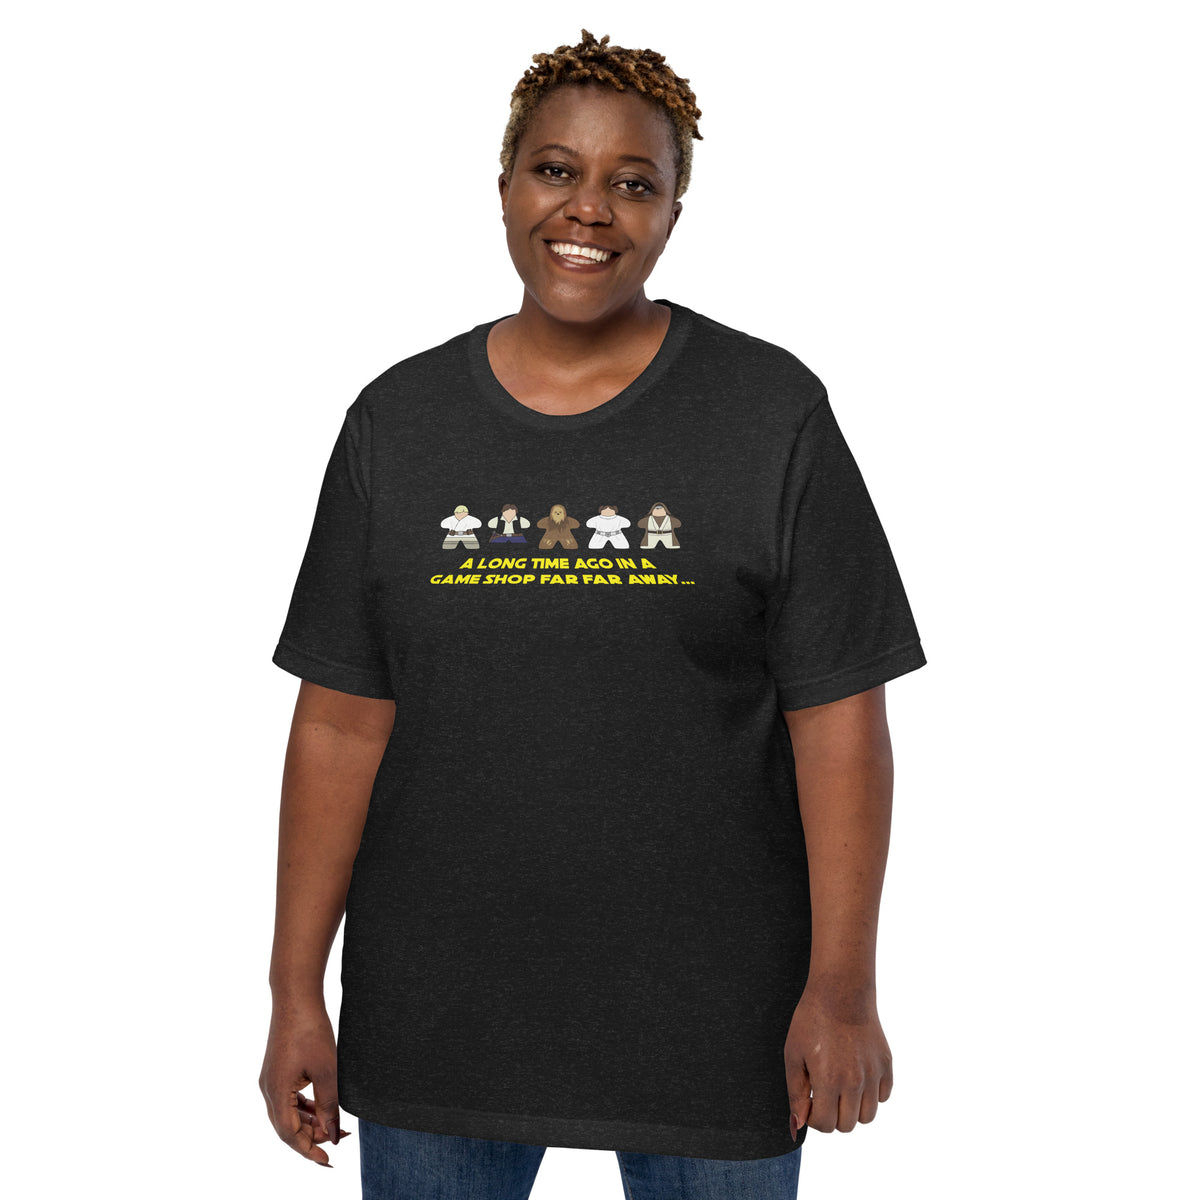 Heather Black T-Shirt with Star Wars Meeples Parody Design worn by a woman